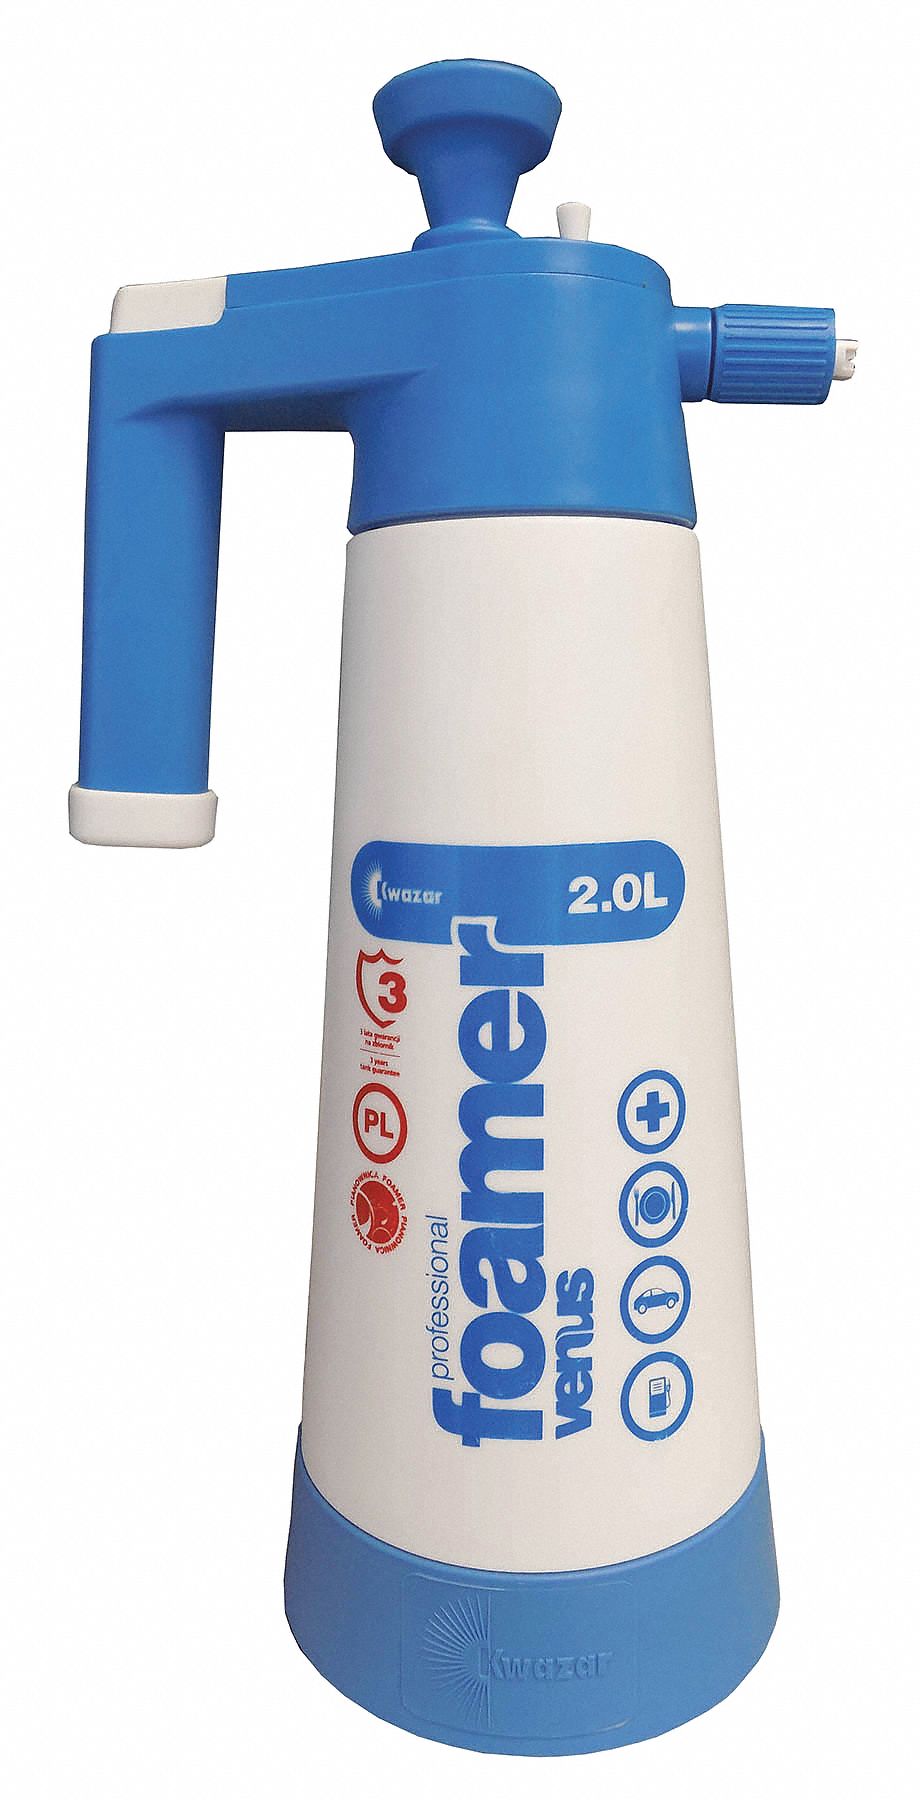 Compressed Air Spray Bottle: 2 L Container Capacity, Mist, White, Blue